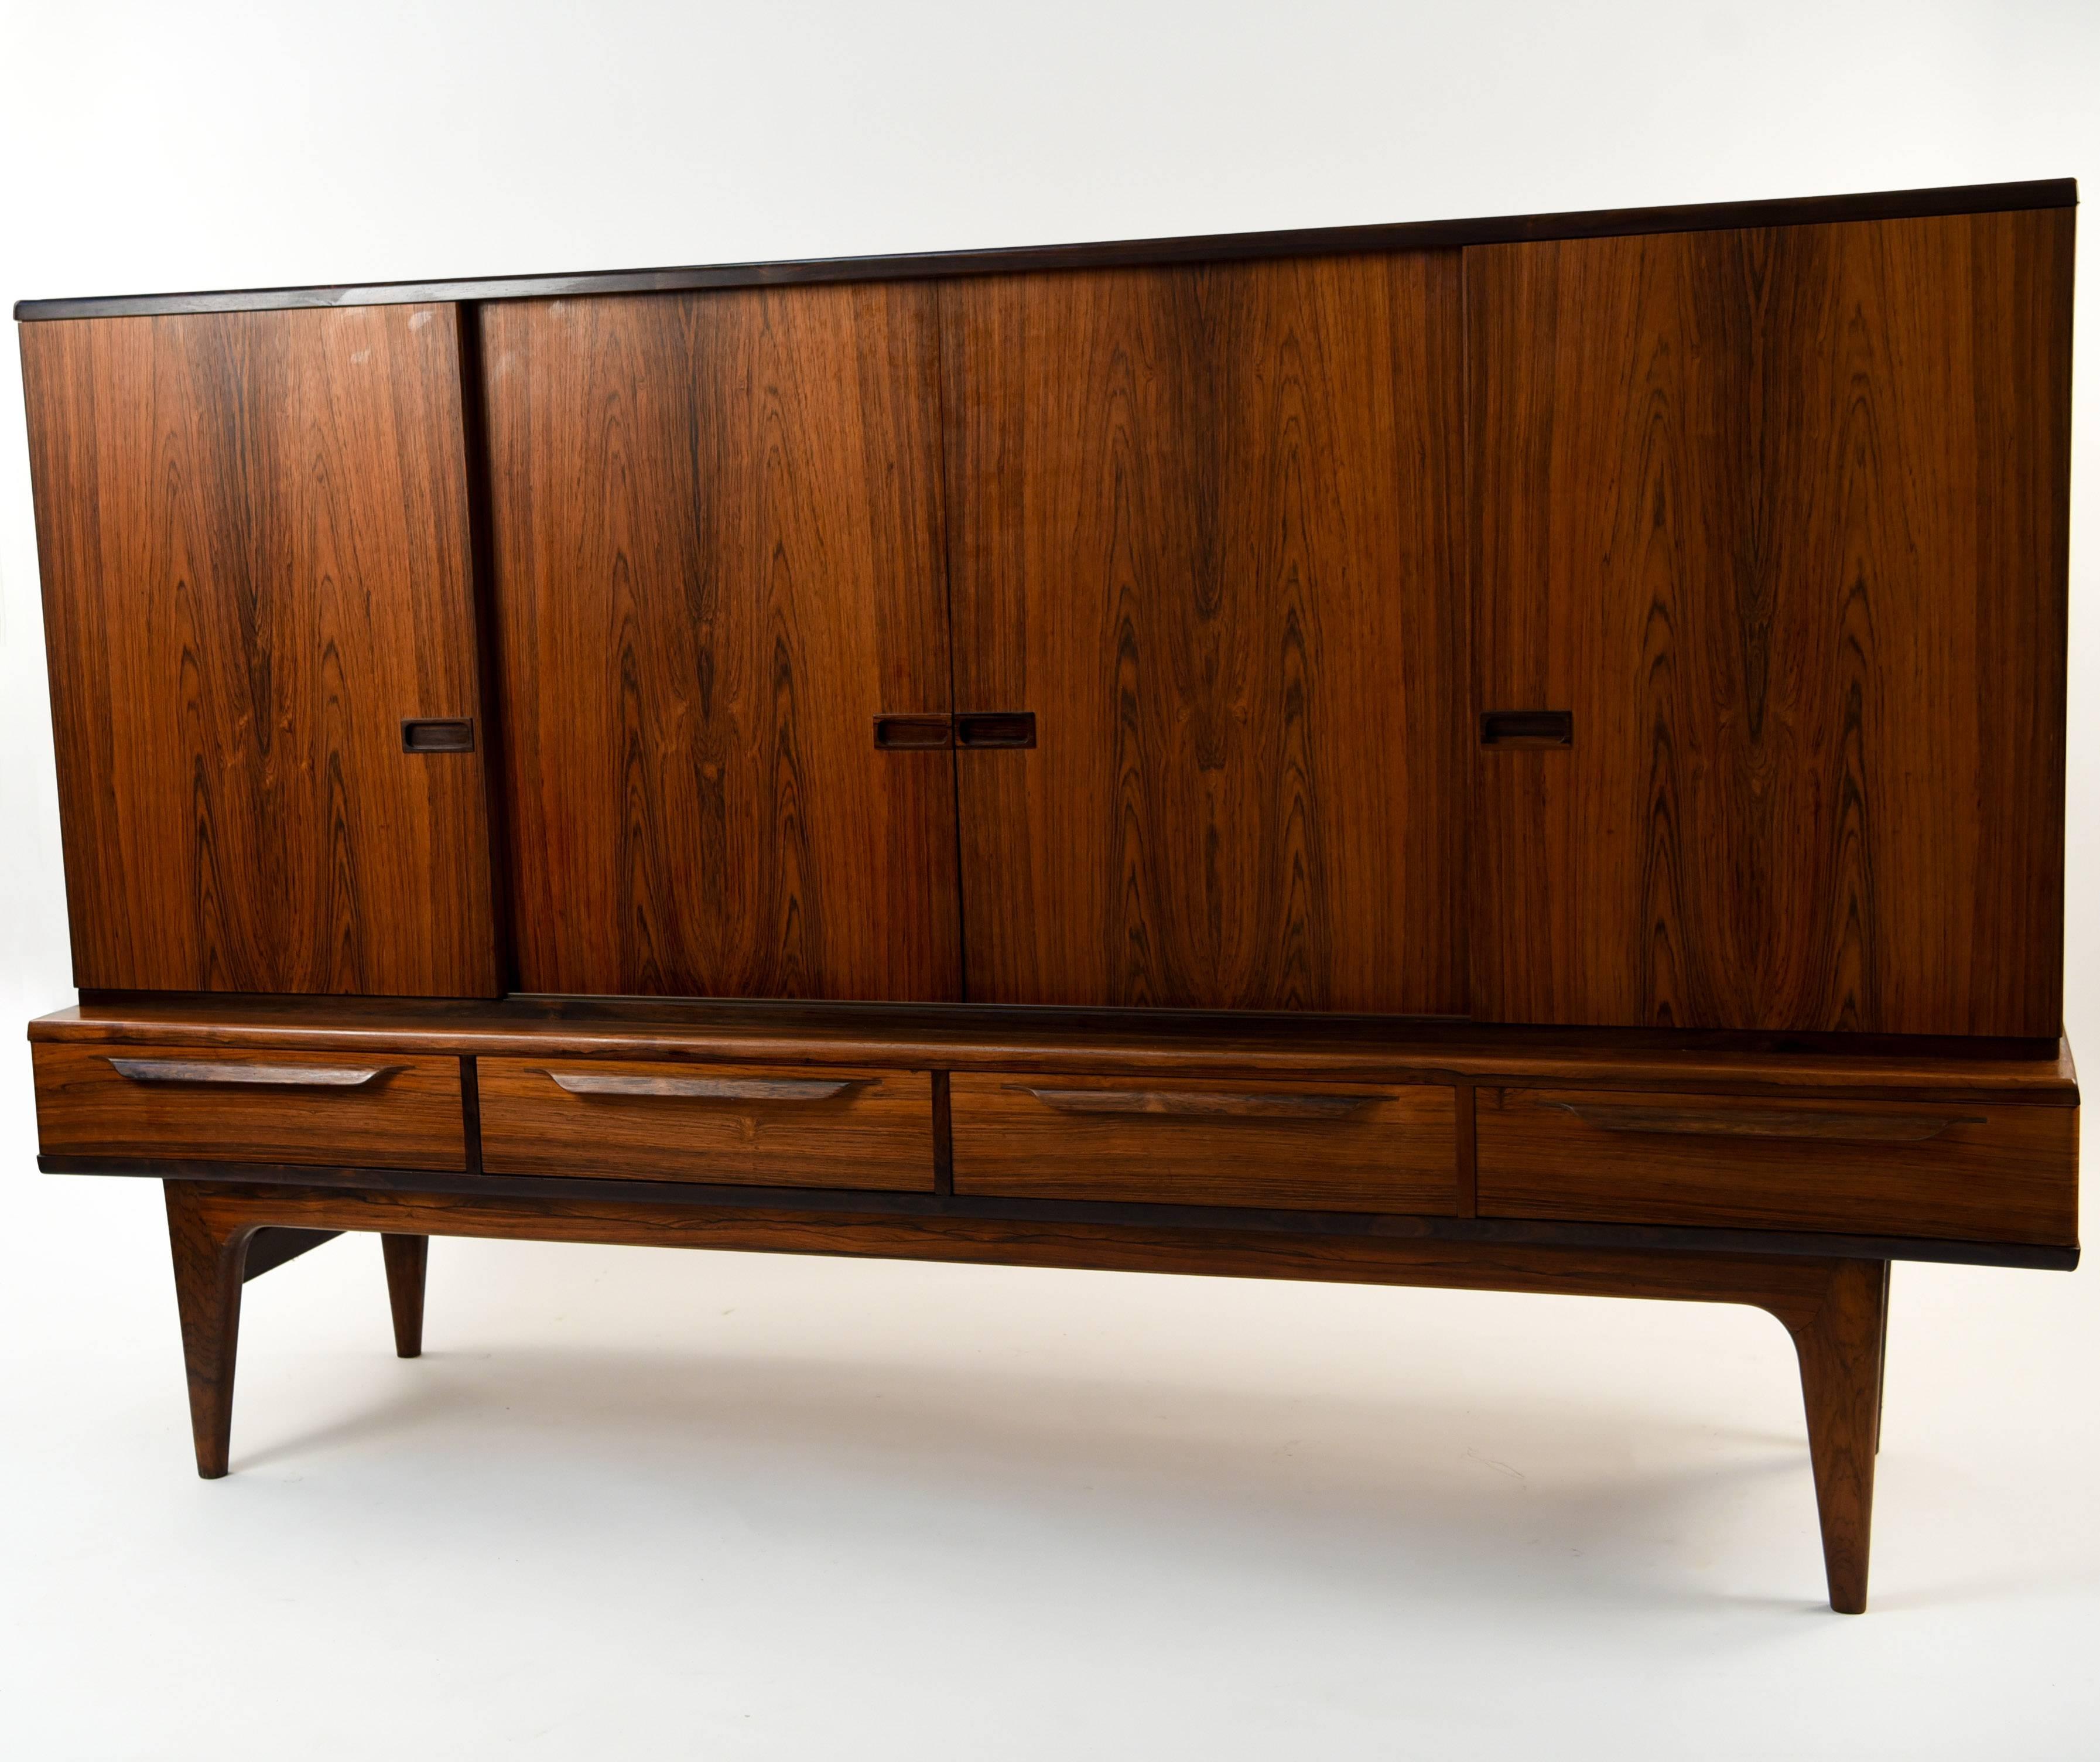 This Danish midcentury tall sideboard is a wonderful sturdy storage piece that combines style with functionality. The rosewood is of a beautiful color and grain. This piece will have a great presence in any room.